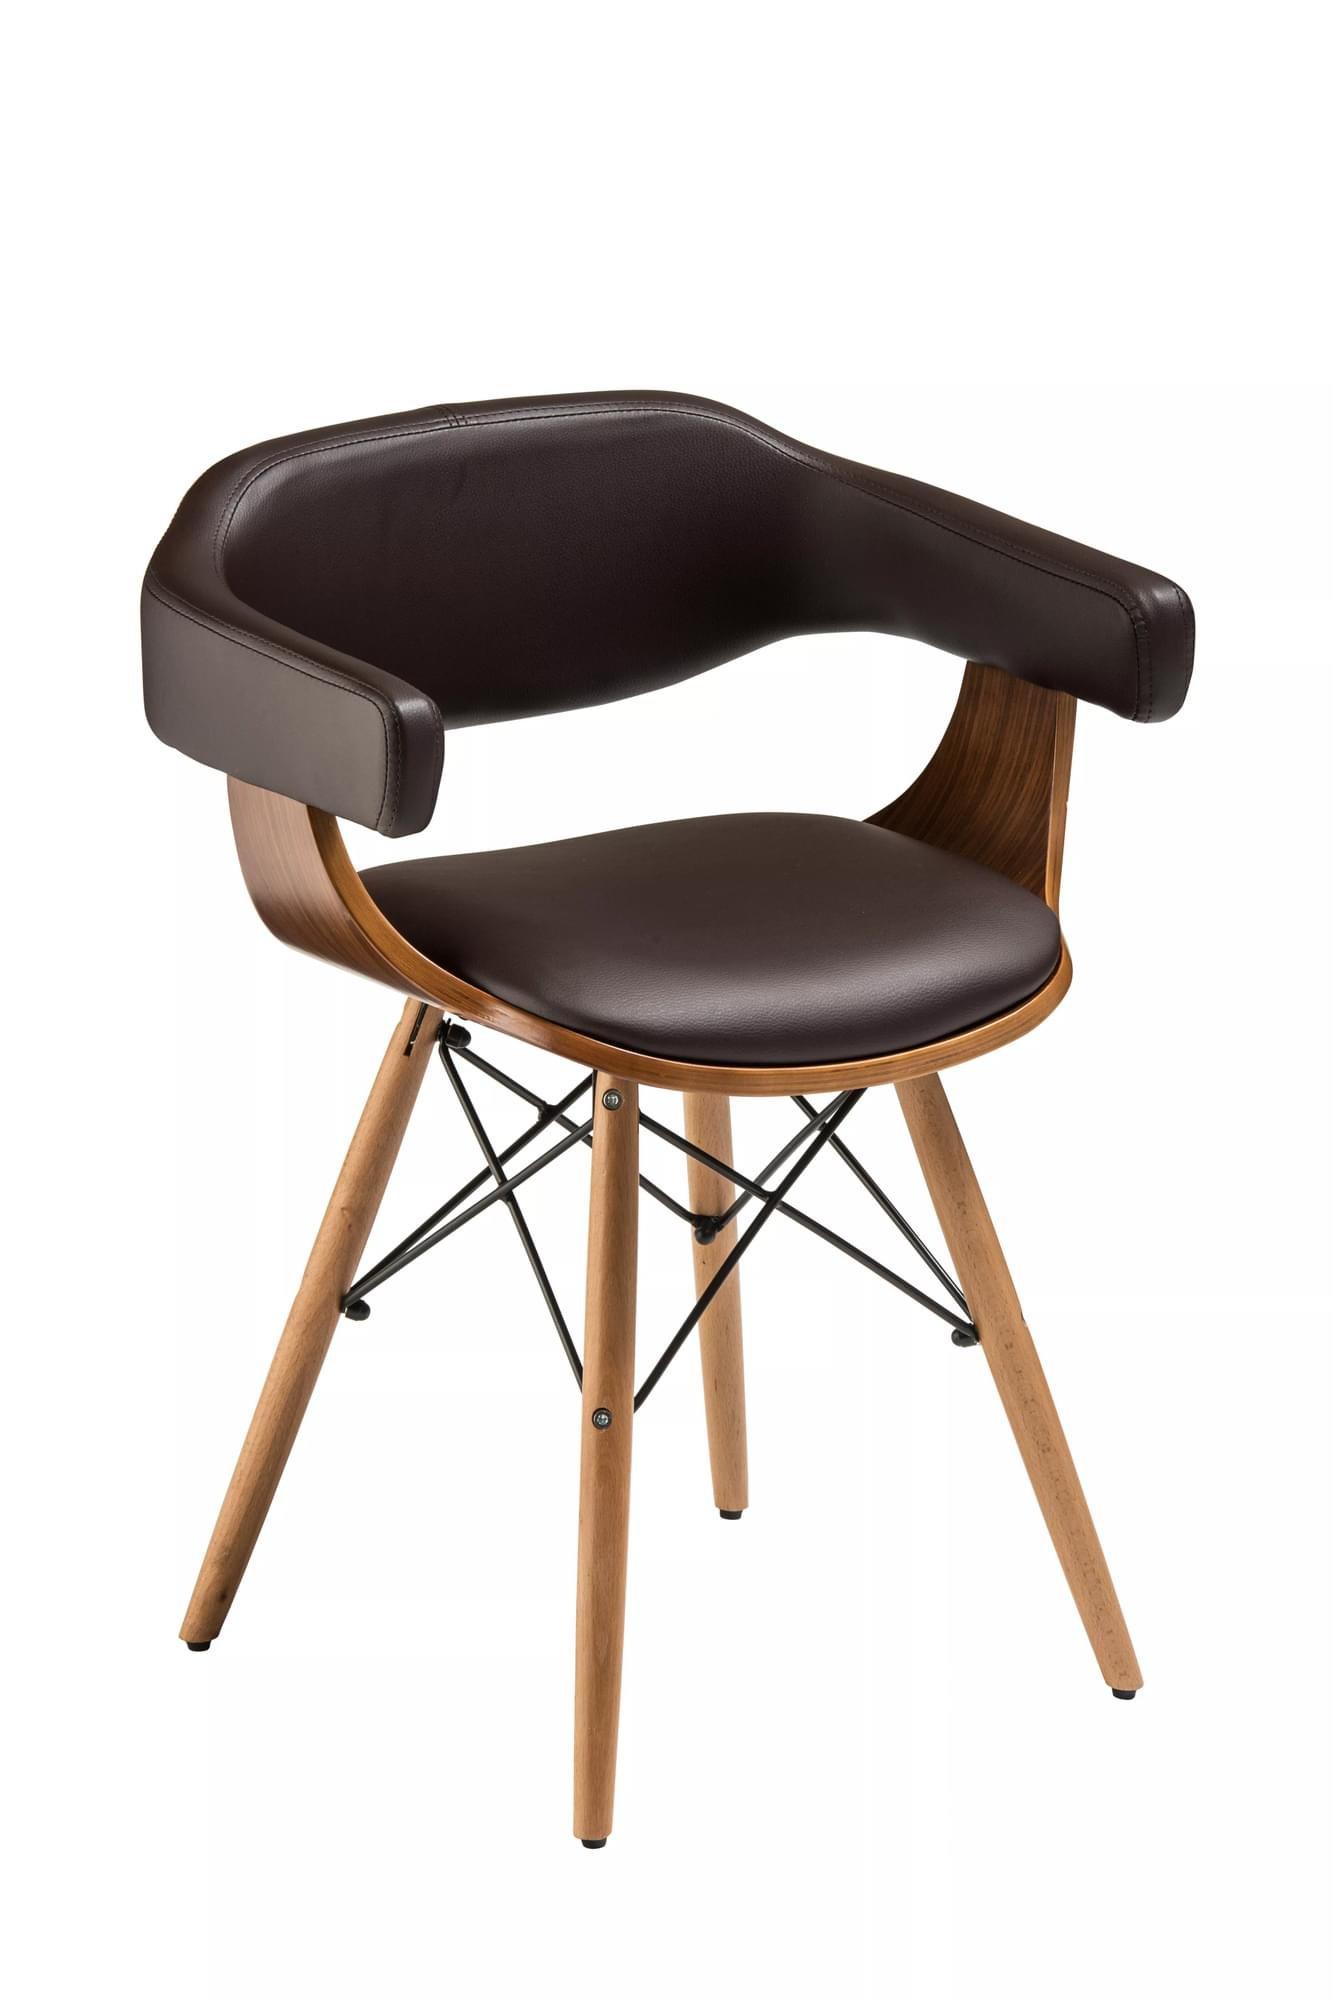 Interiors by Premier Leather Effect Beech Wood Legs Chair